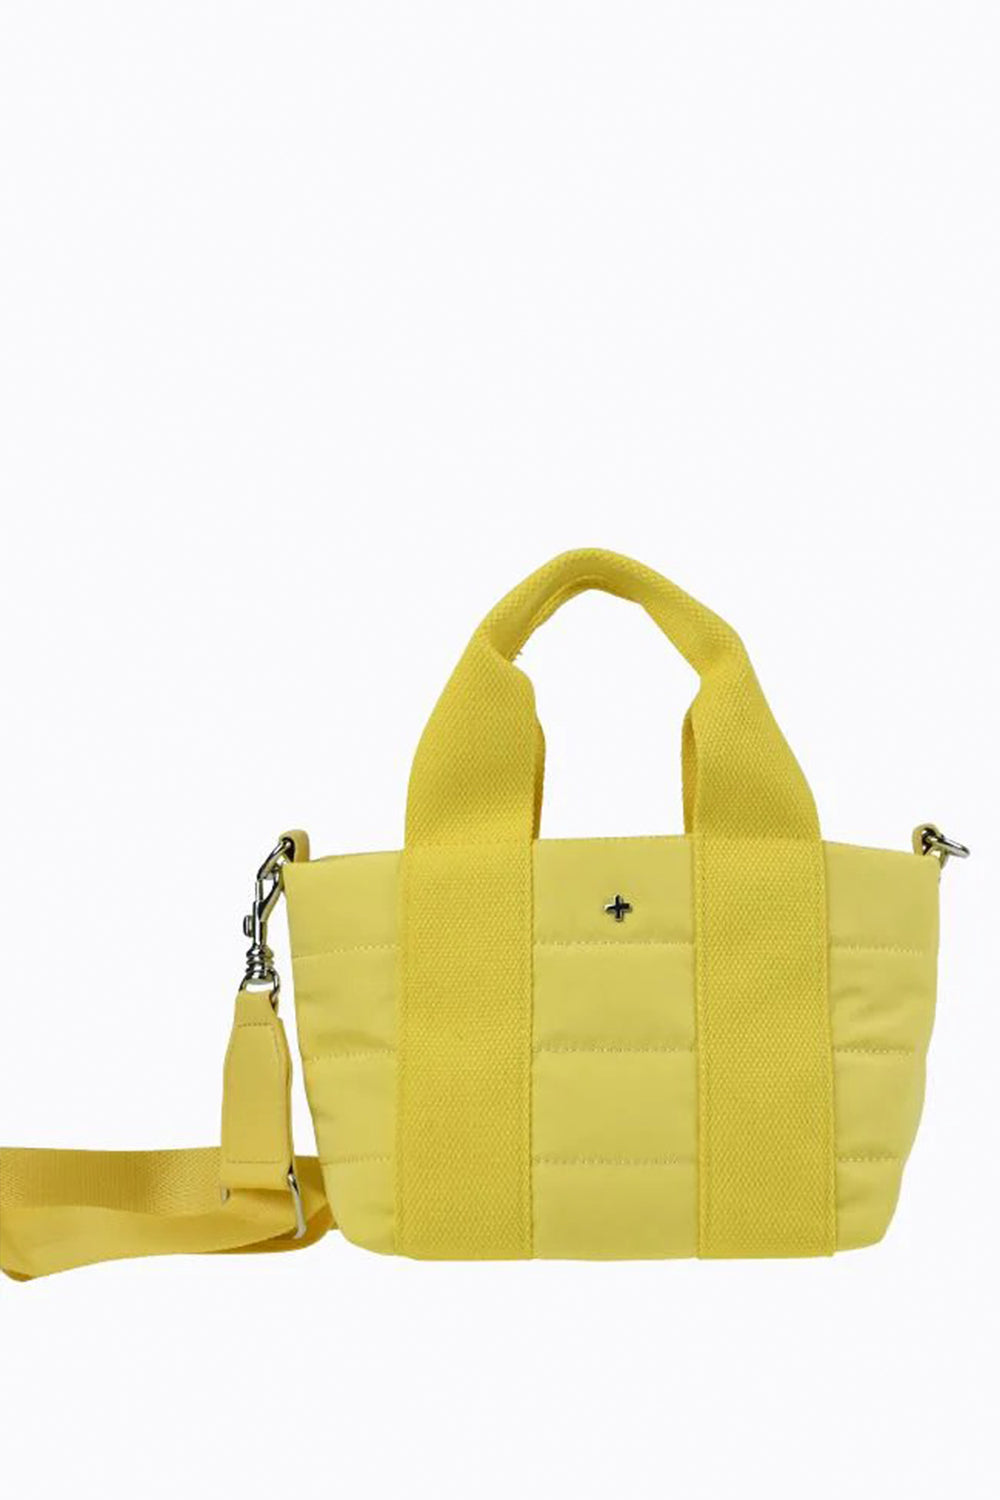 Peta+Jain / Envy Quilted Bag with Xbody strap / Lemon Silver